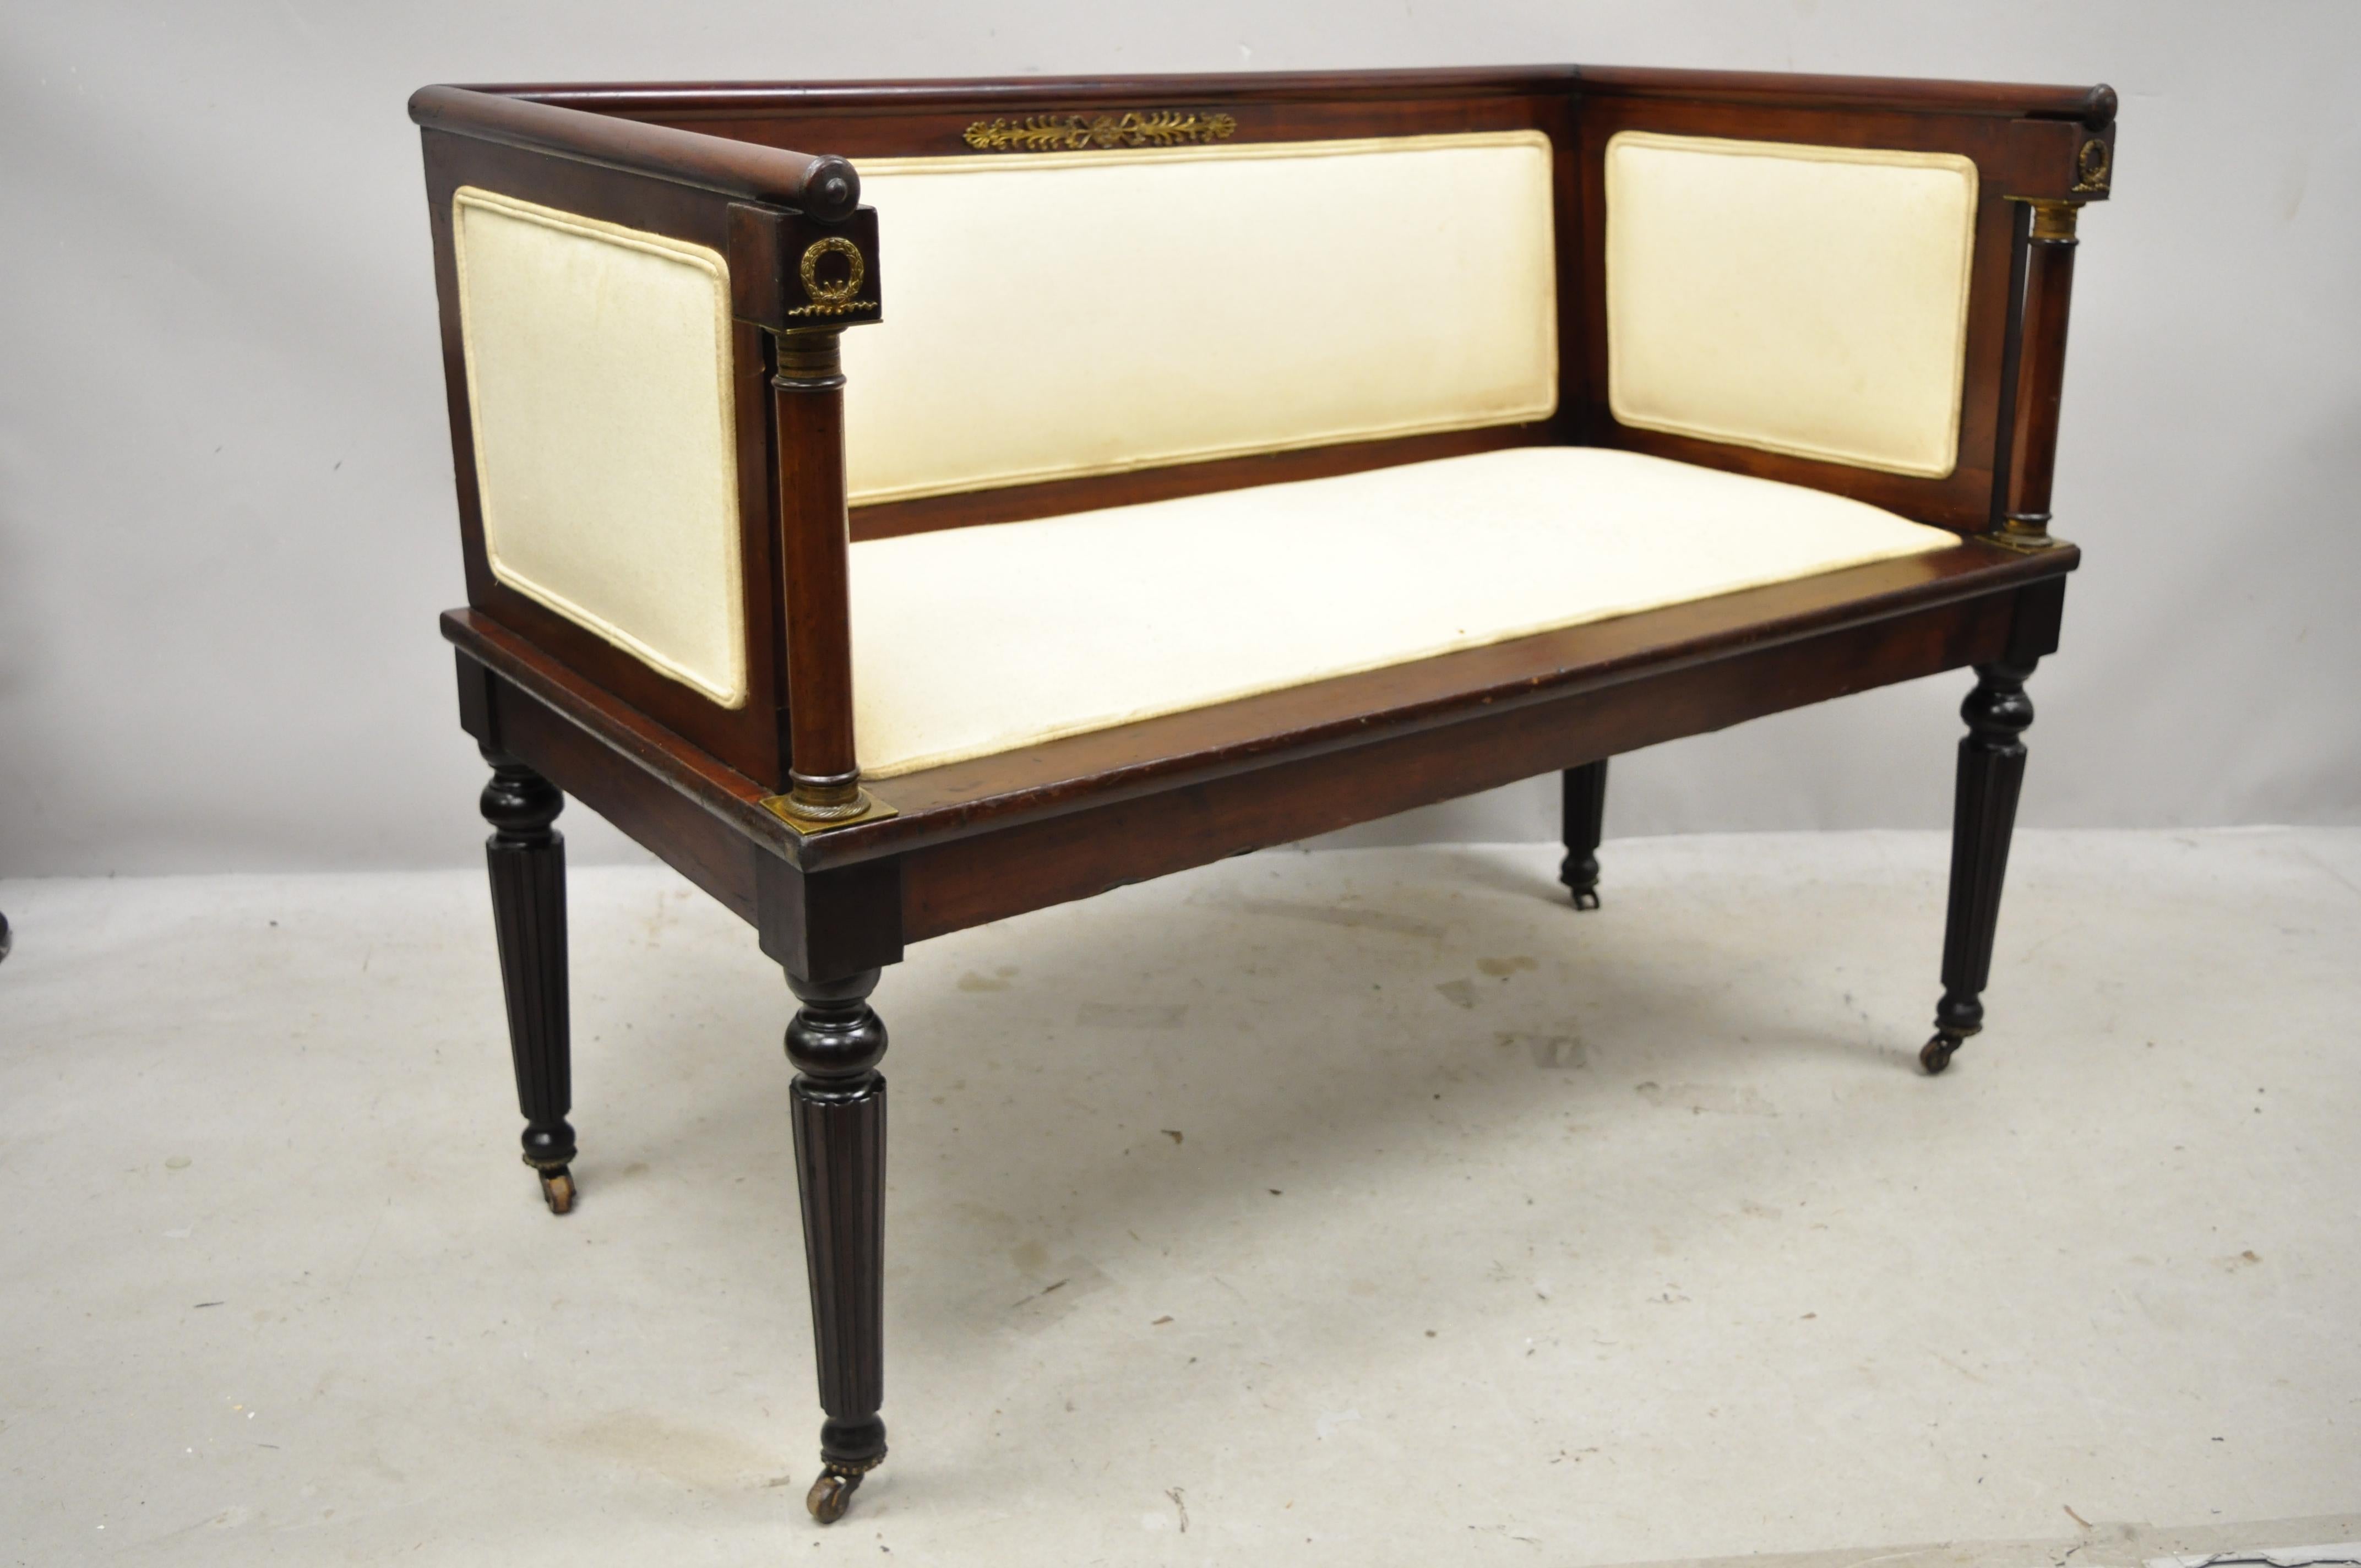 Antique French Empire mahogany bench settee with bronze ormolu and even arms. Item features finely cast bronze ormolu, brass rolling casters, tapered legs, very nice antique item, great style and form, circa early 1900s. Measurements: 32